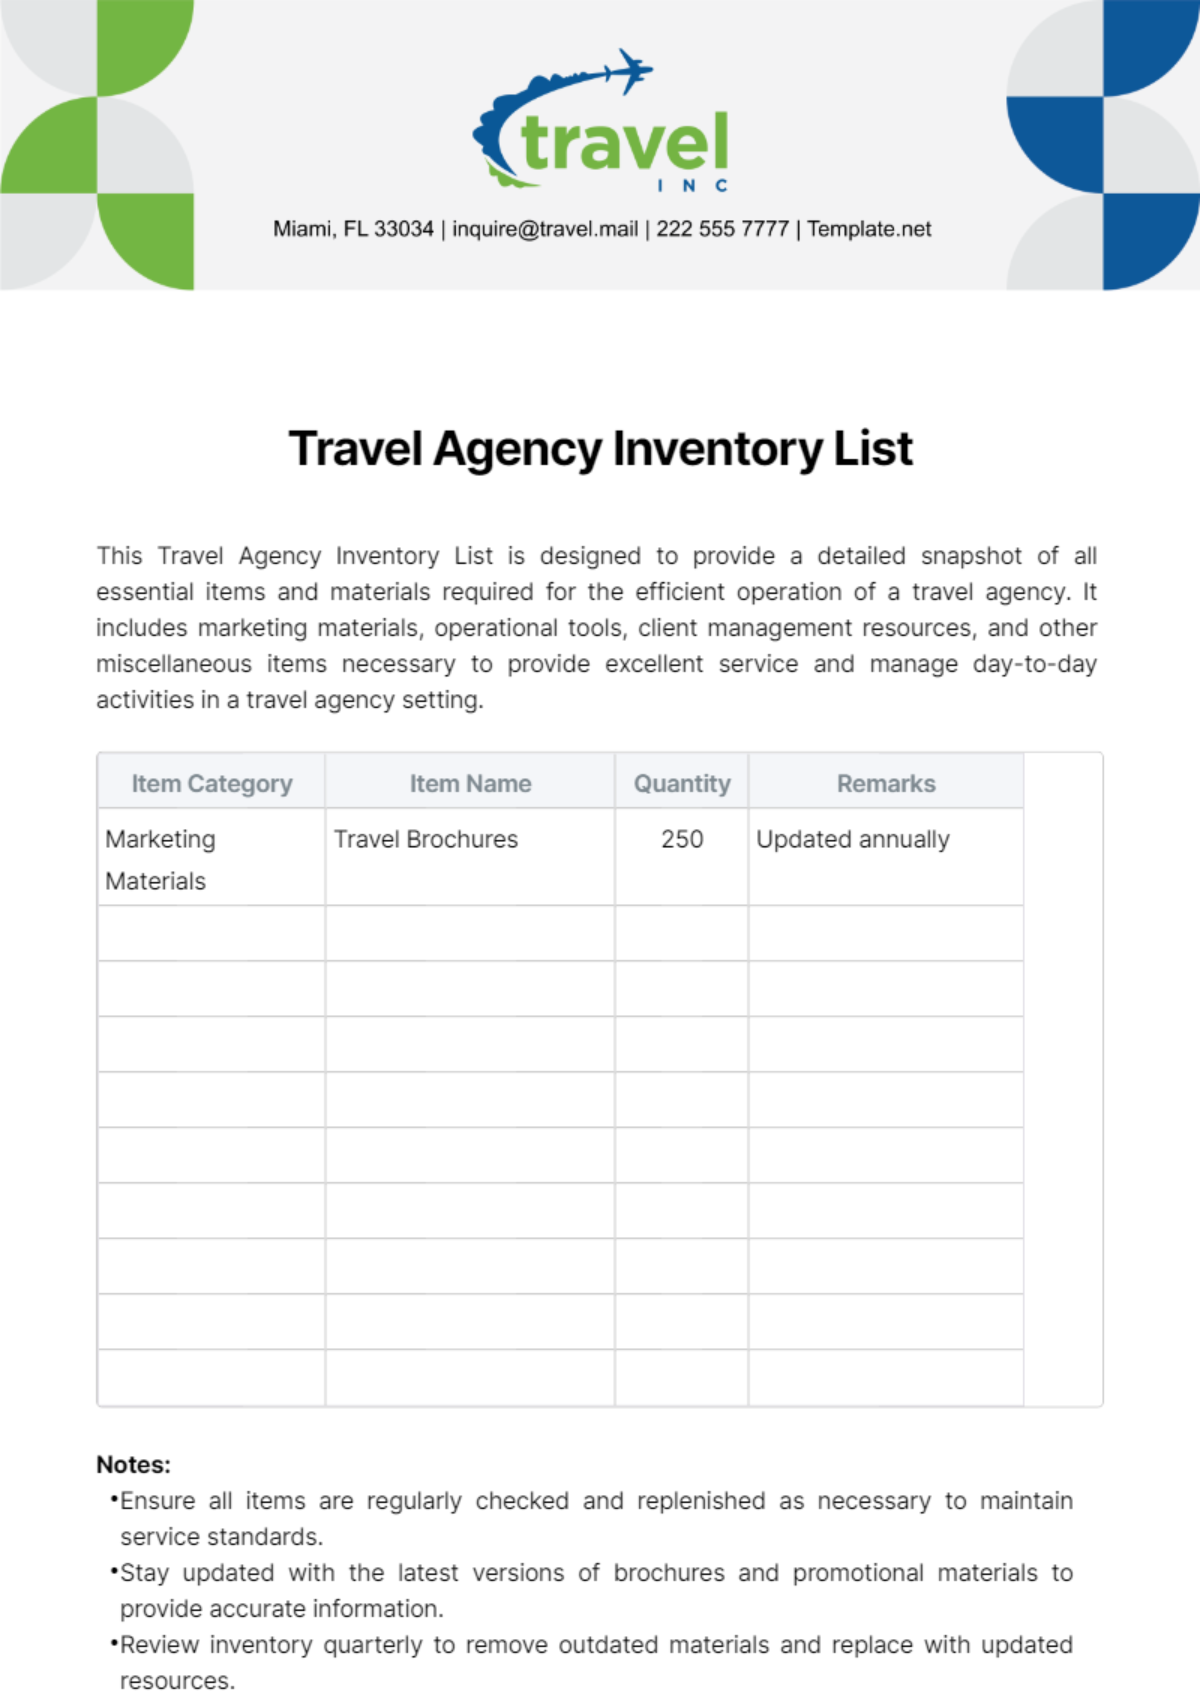 Free Travel Agency Inventory List Template